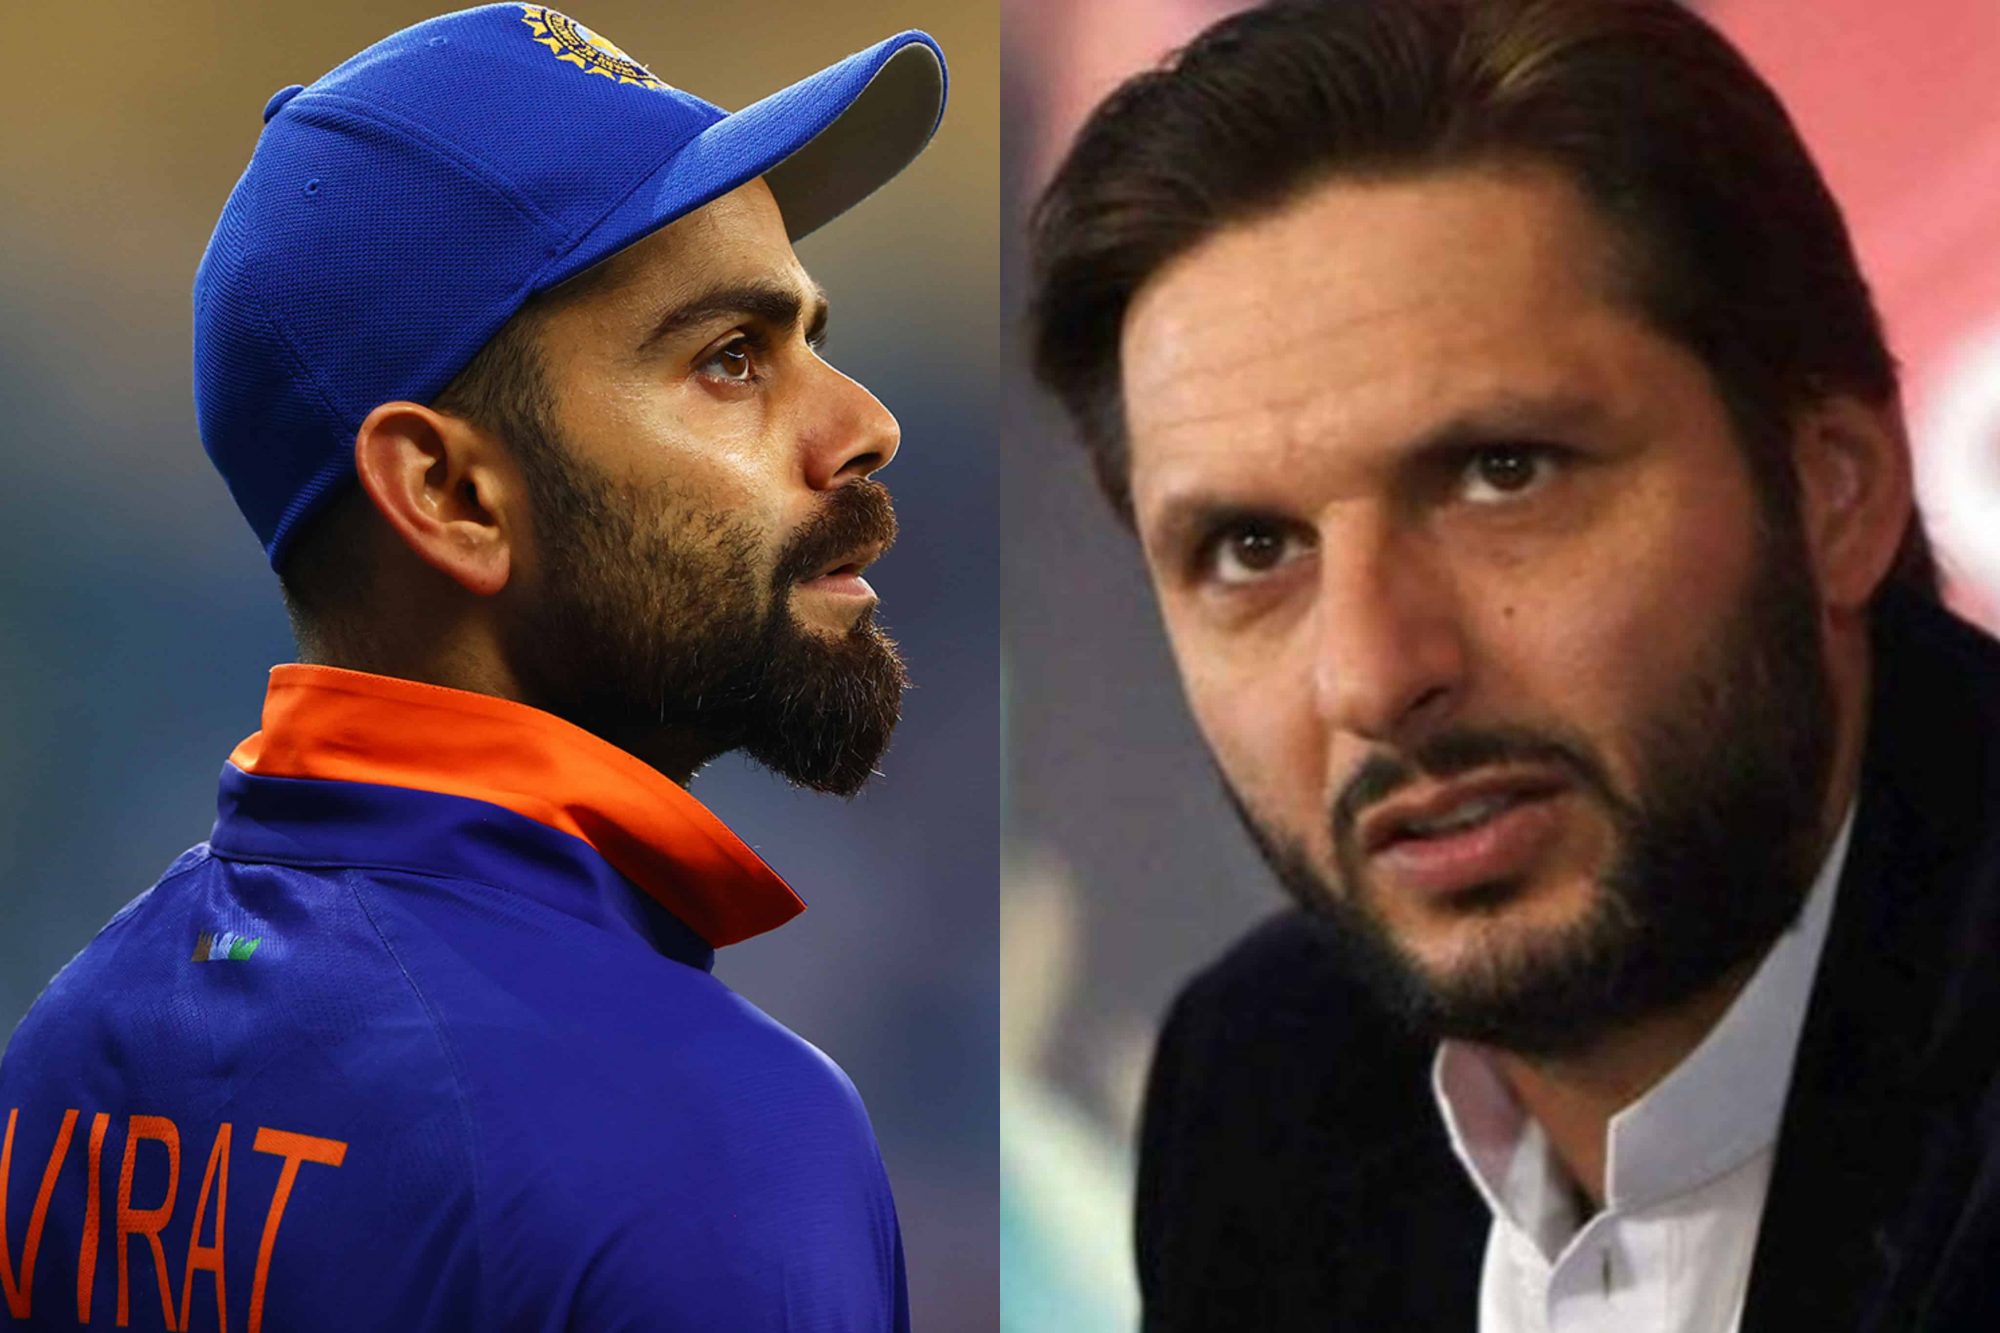 Virat Kohli Should Leave India's Captaincy In All Formats And Enjoy his Batting – Shahid Afridi